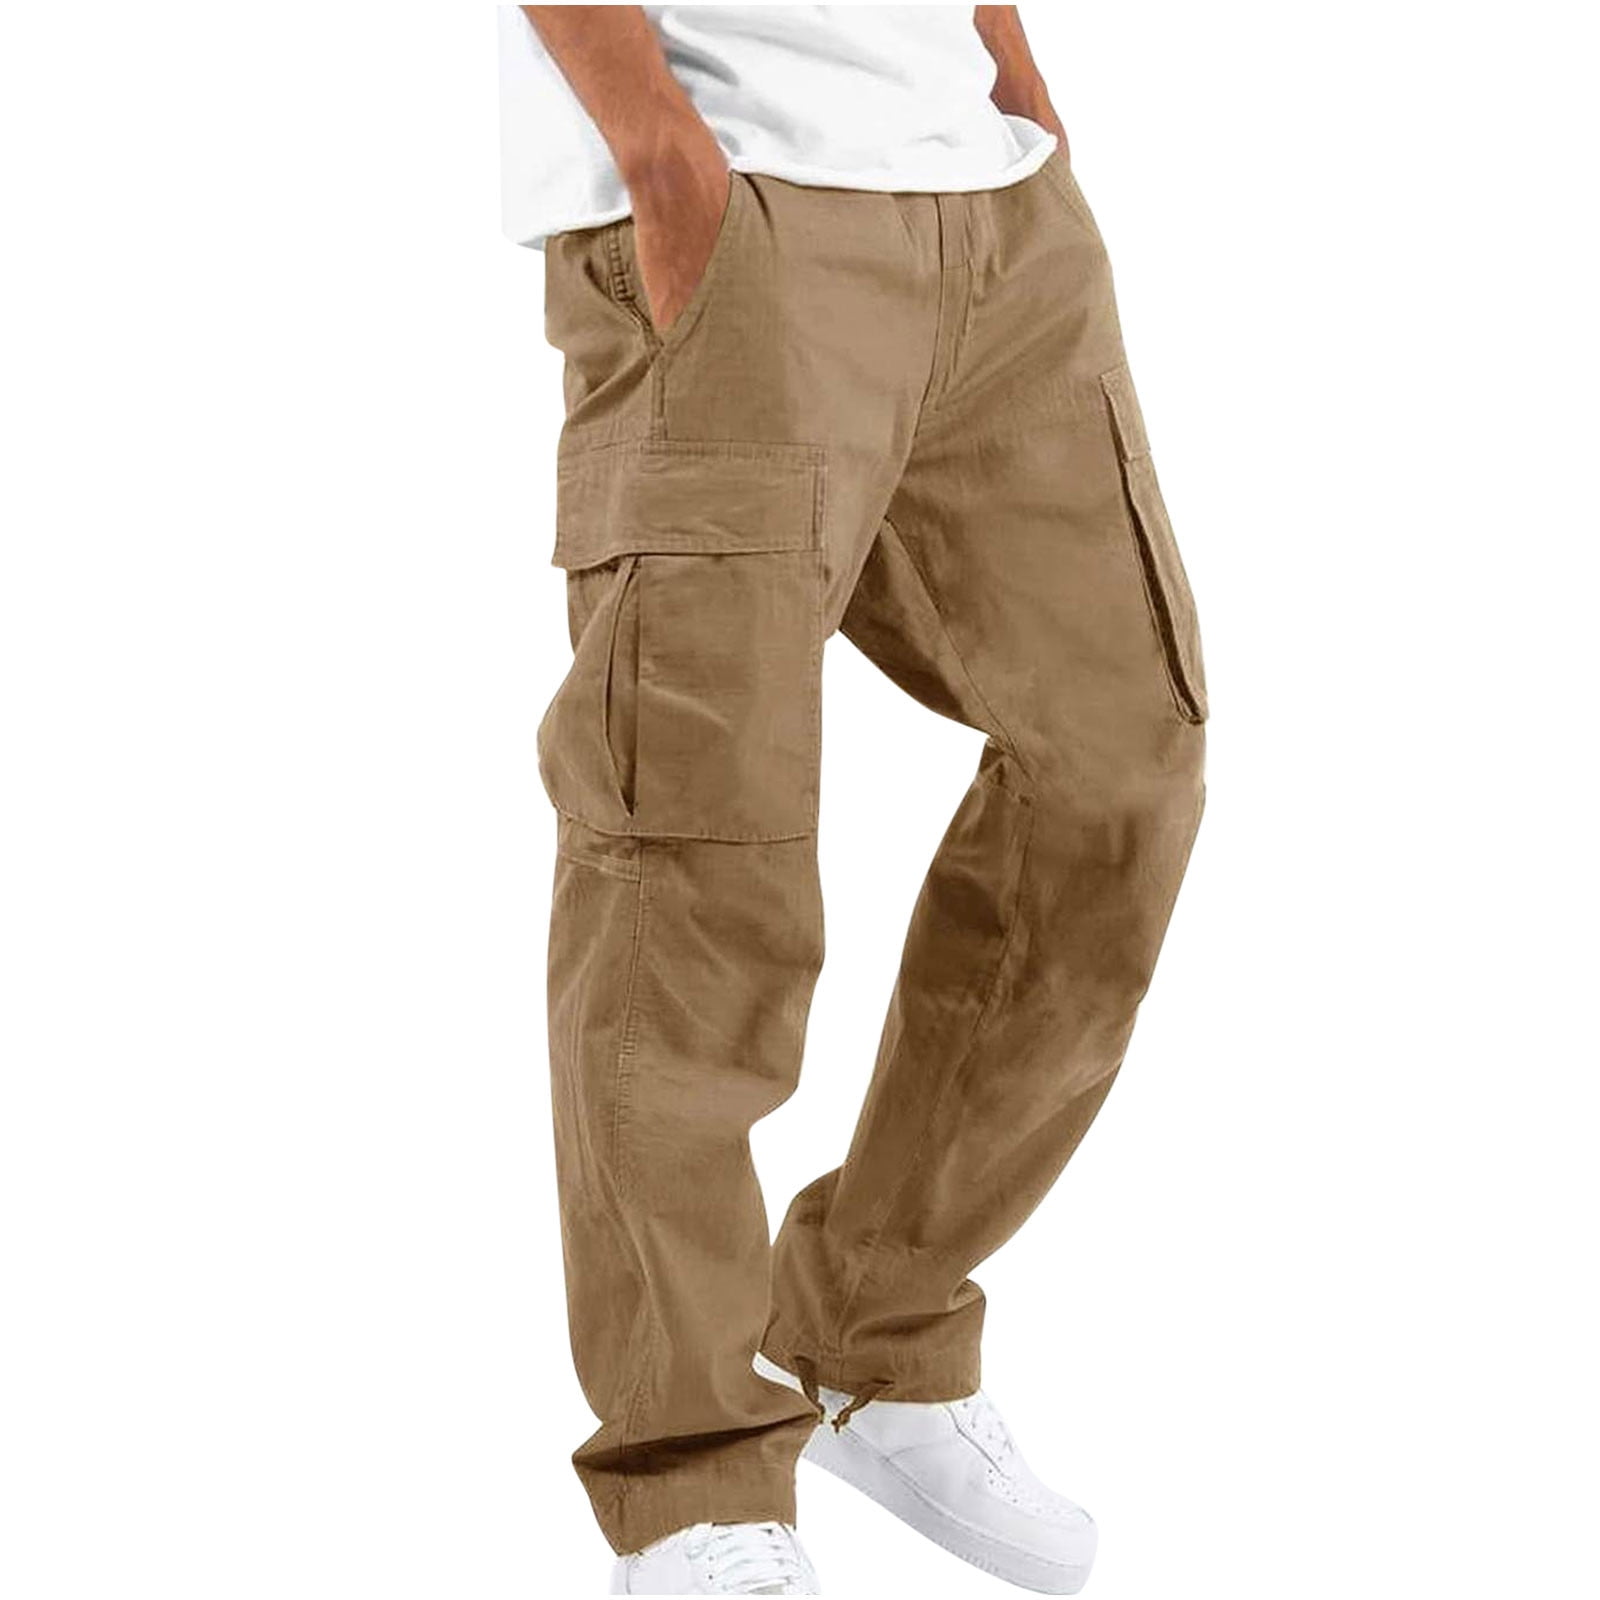 Mens Pants On Sale: Load Up on Pleated Chinos, Patchwork Cords, and  Perfectly Crinkly Cargos for the Low | GQ